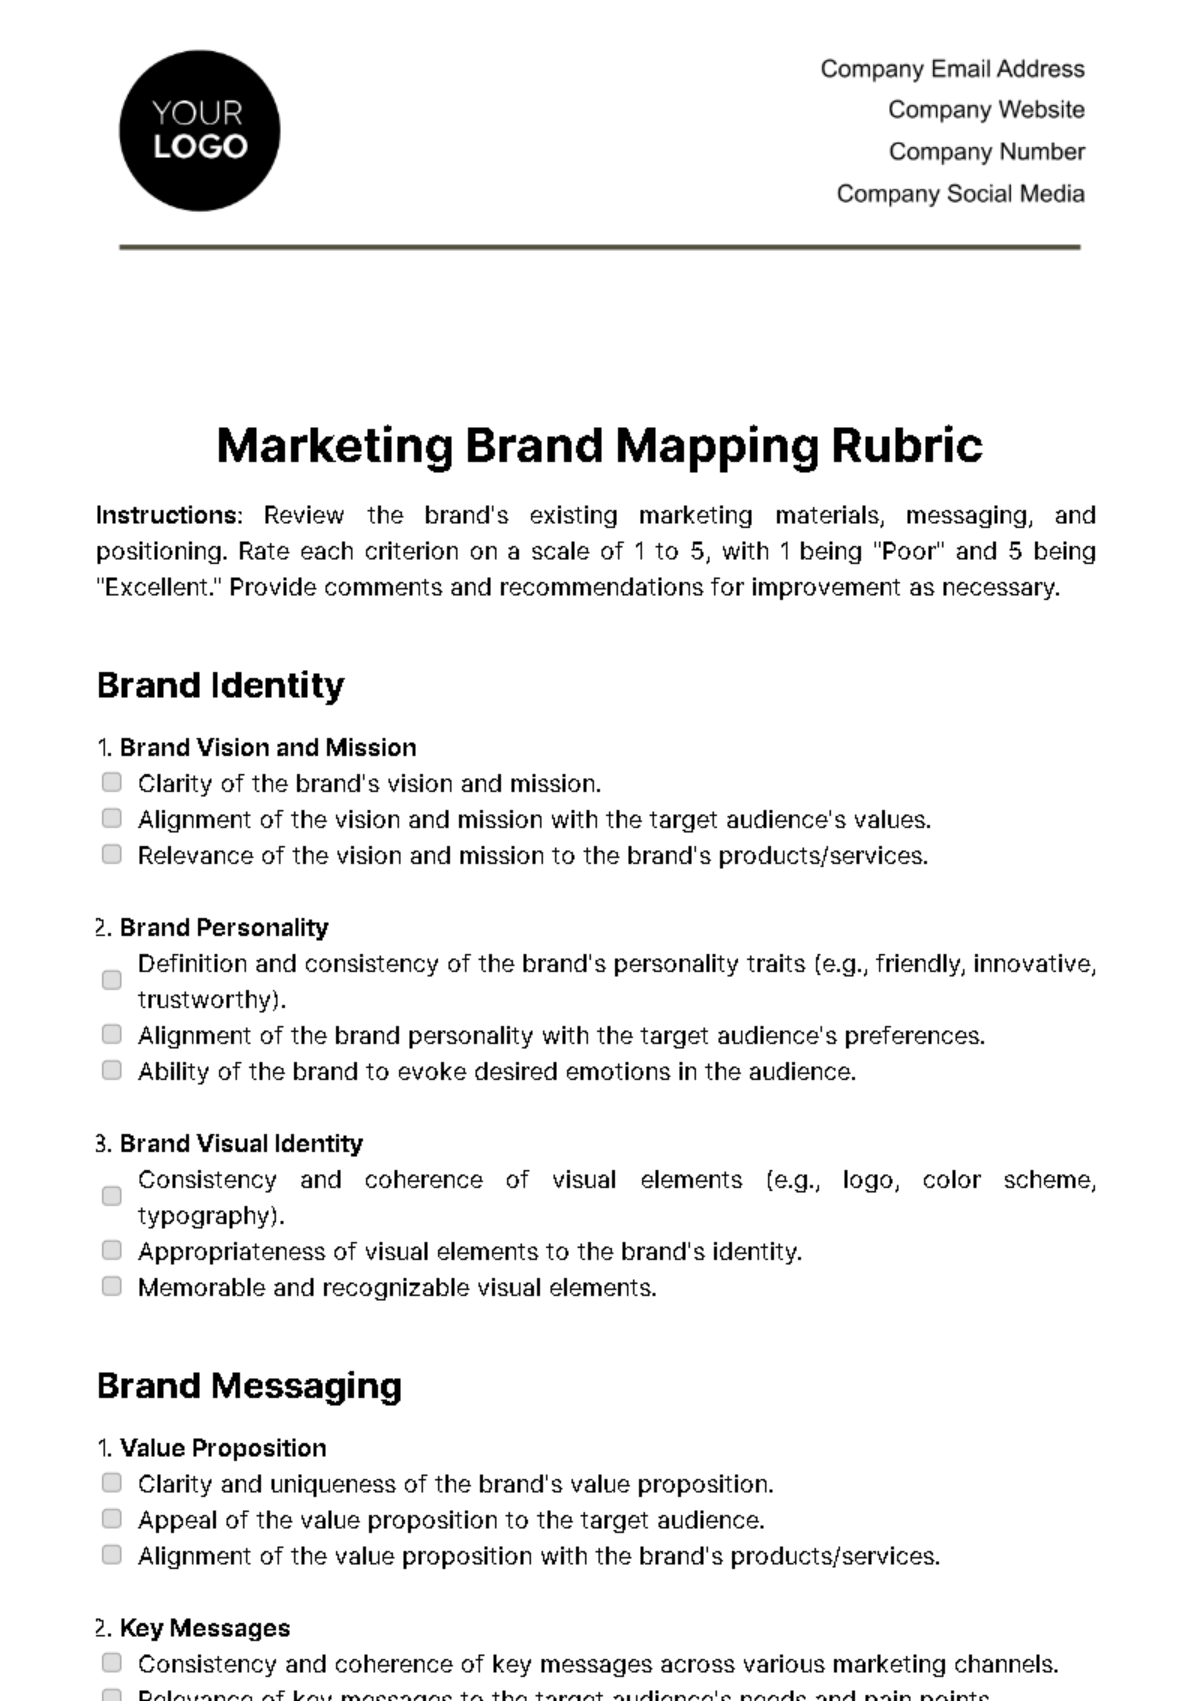 Free Marketing Brand Mapping Rubric Template